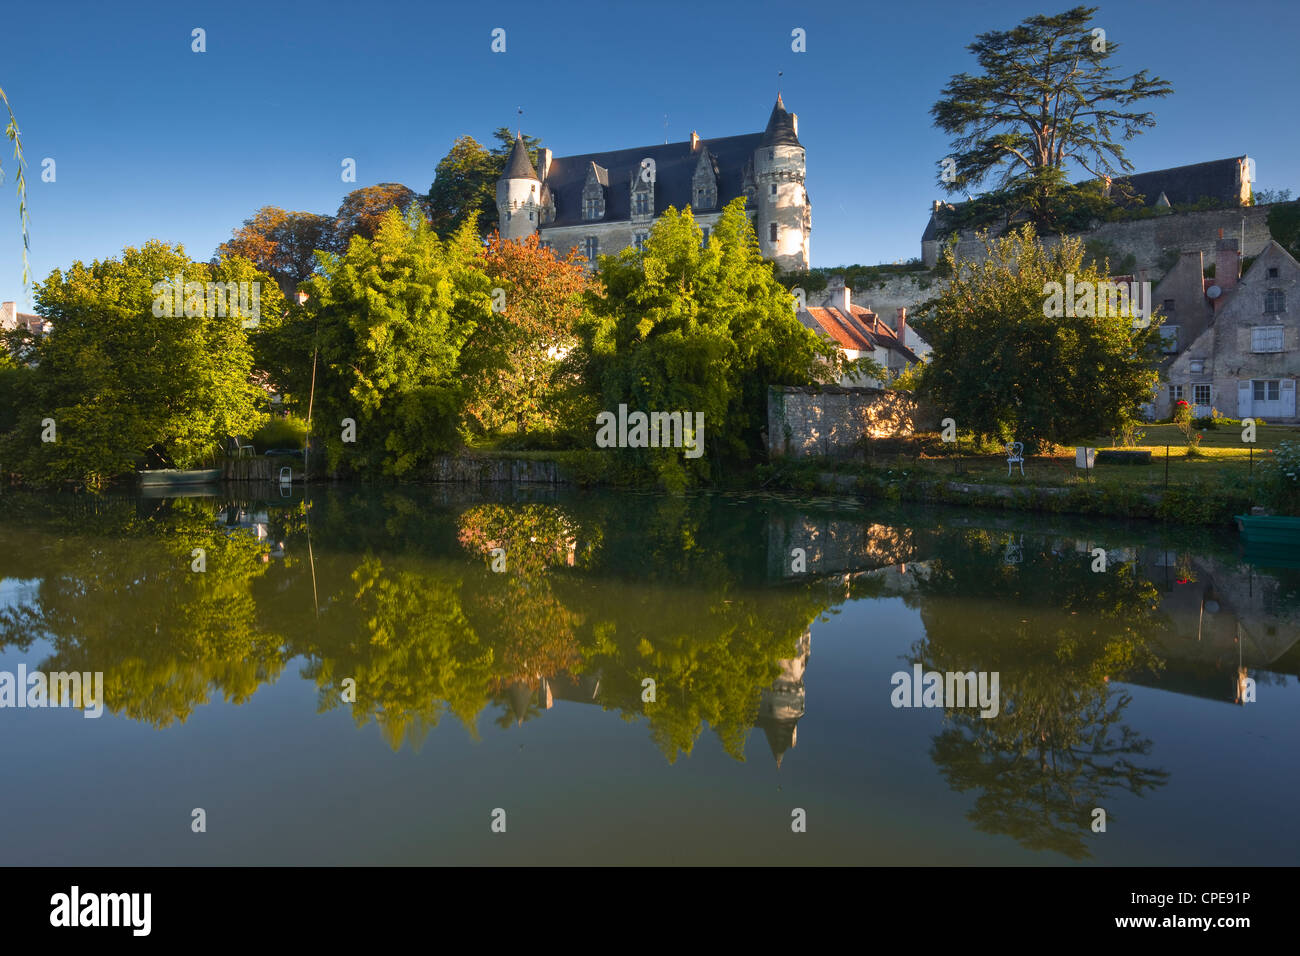 One Two Workshops Loire Cher Region Editorial Stock Photo - Stock Image